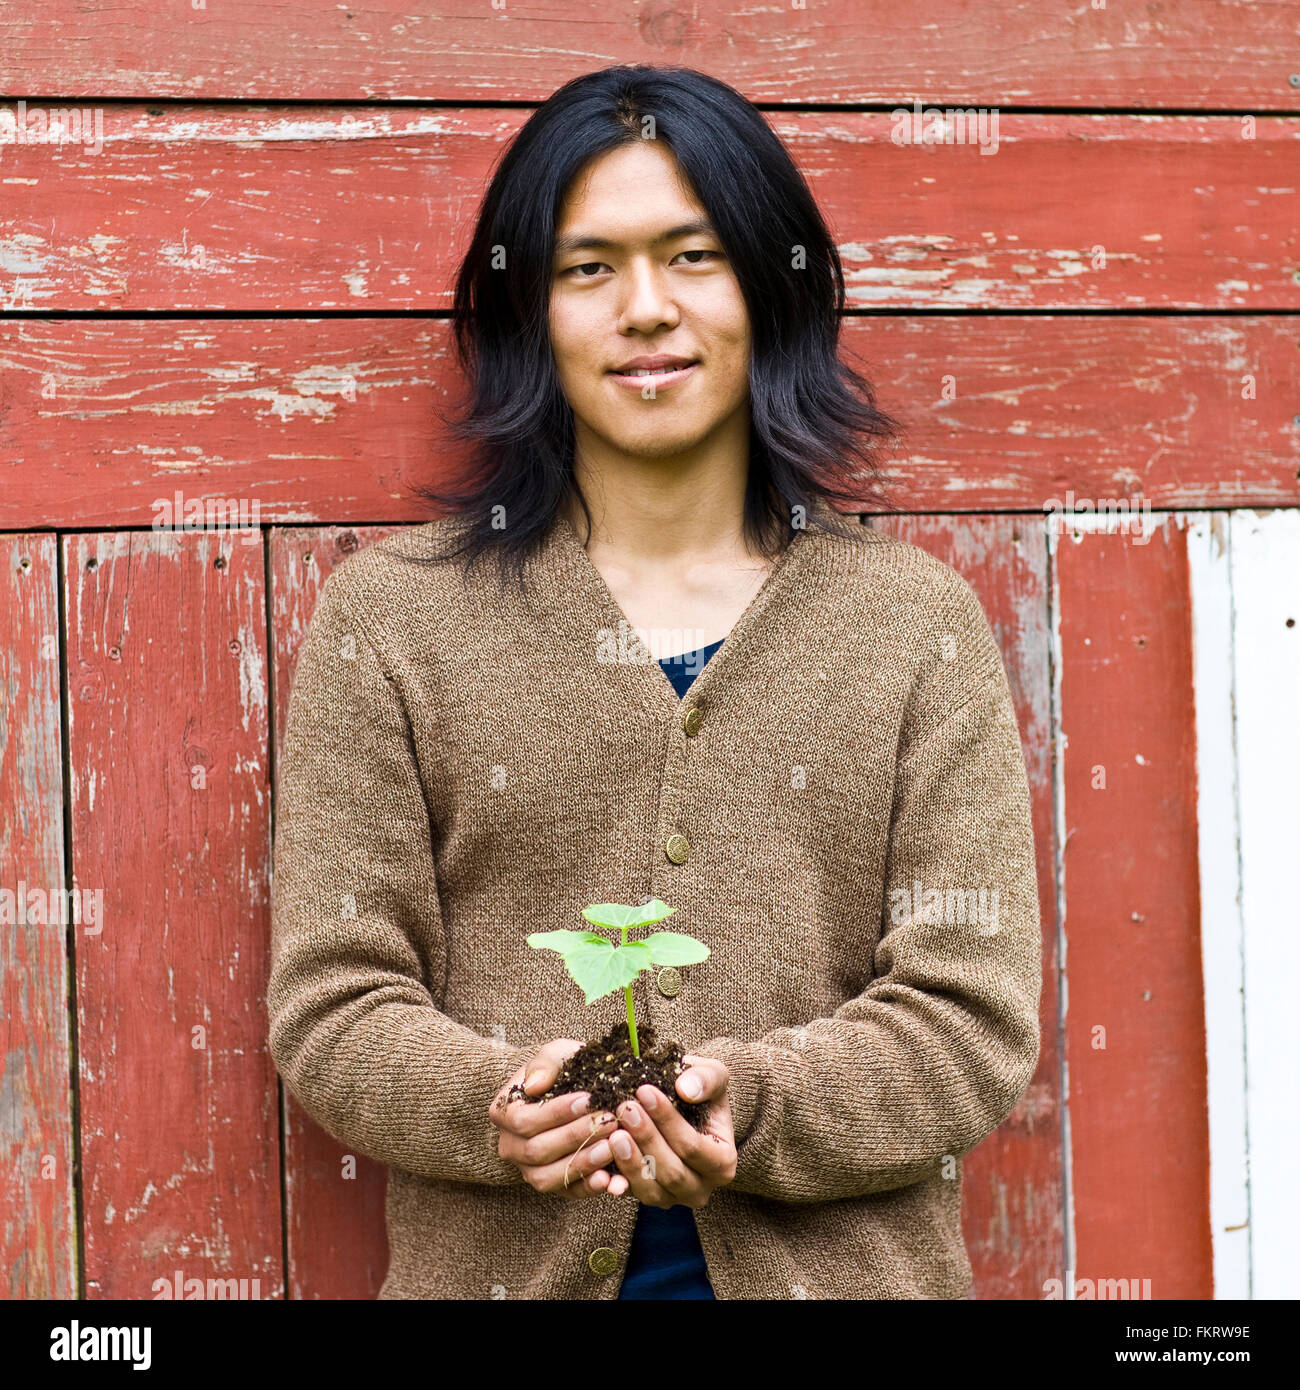 Japanese man holding potted plant outdoors Stock Photo